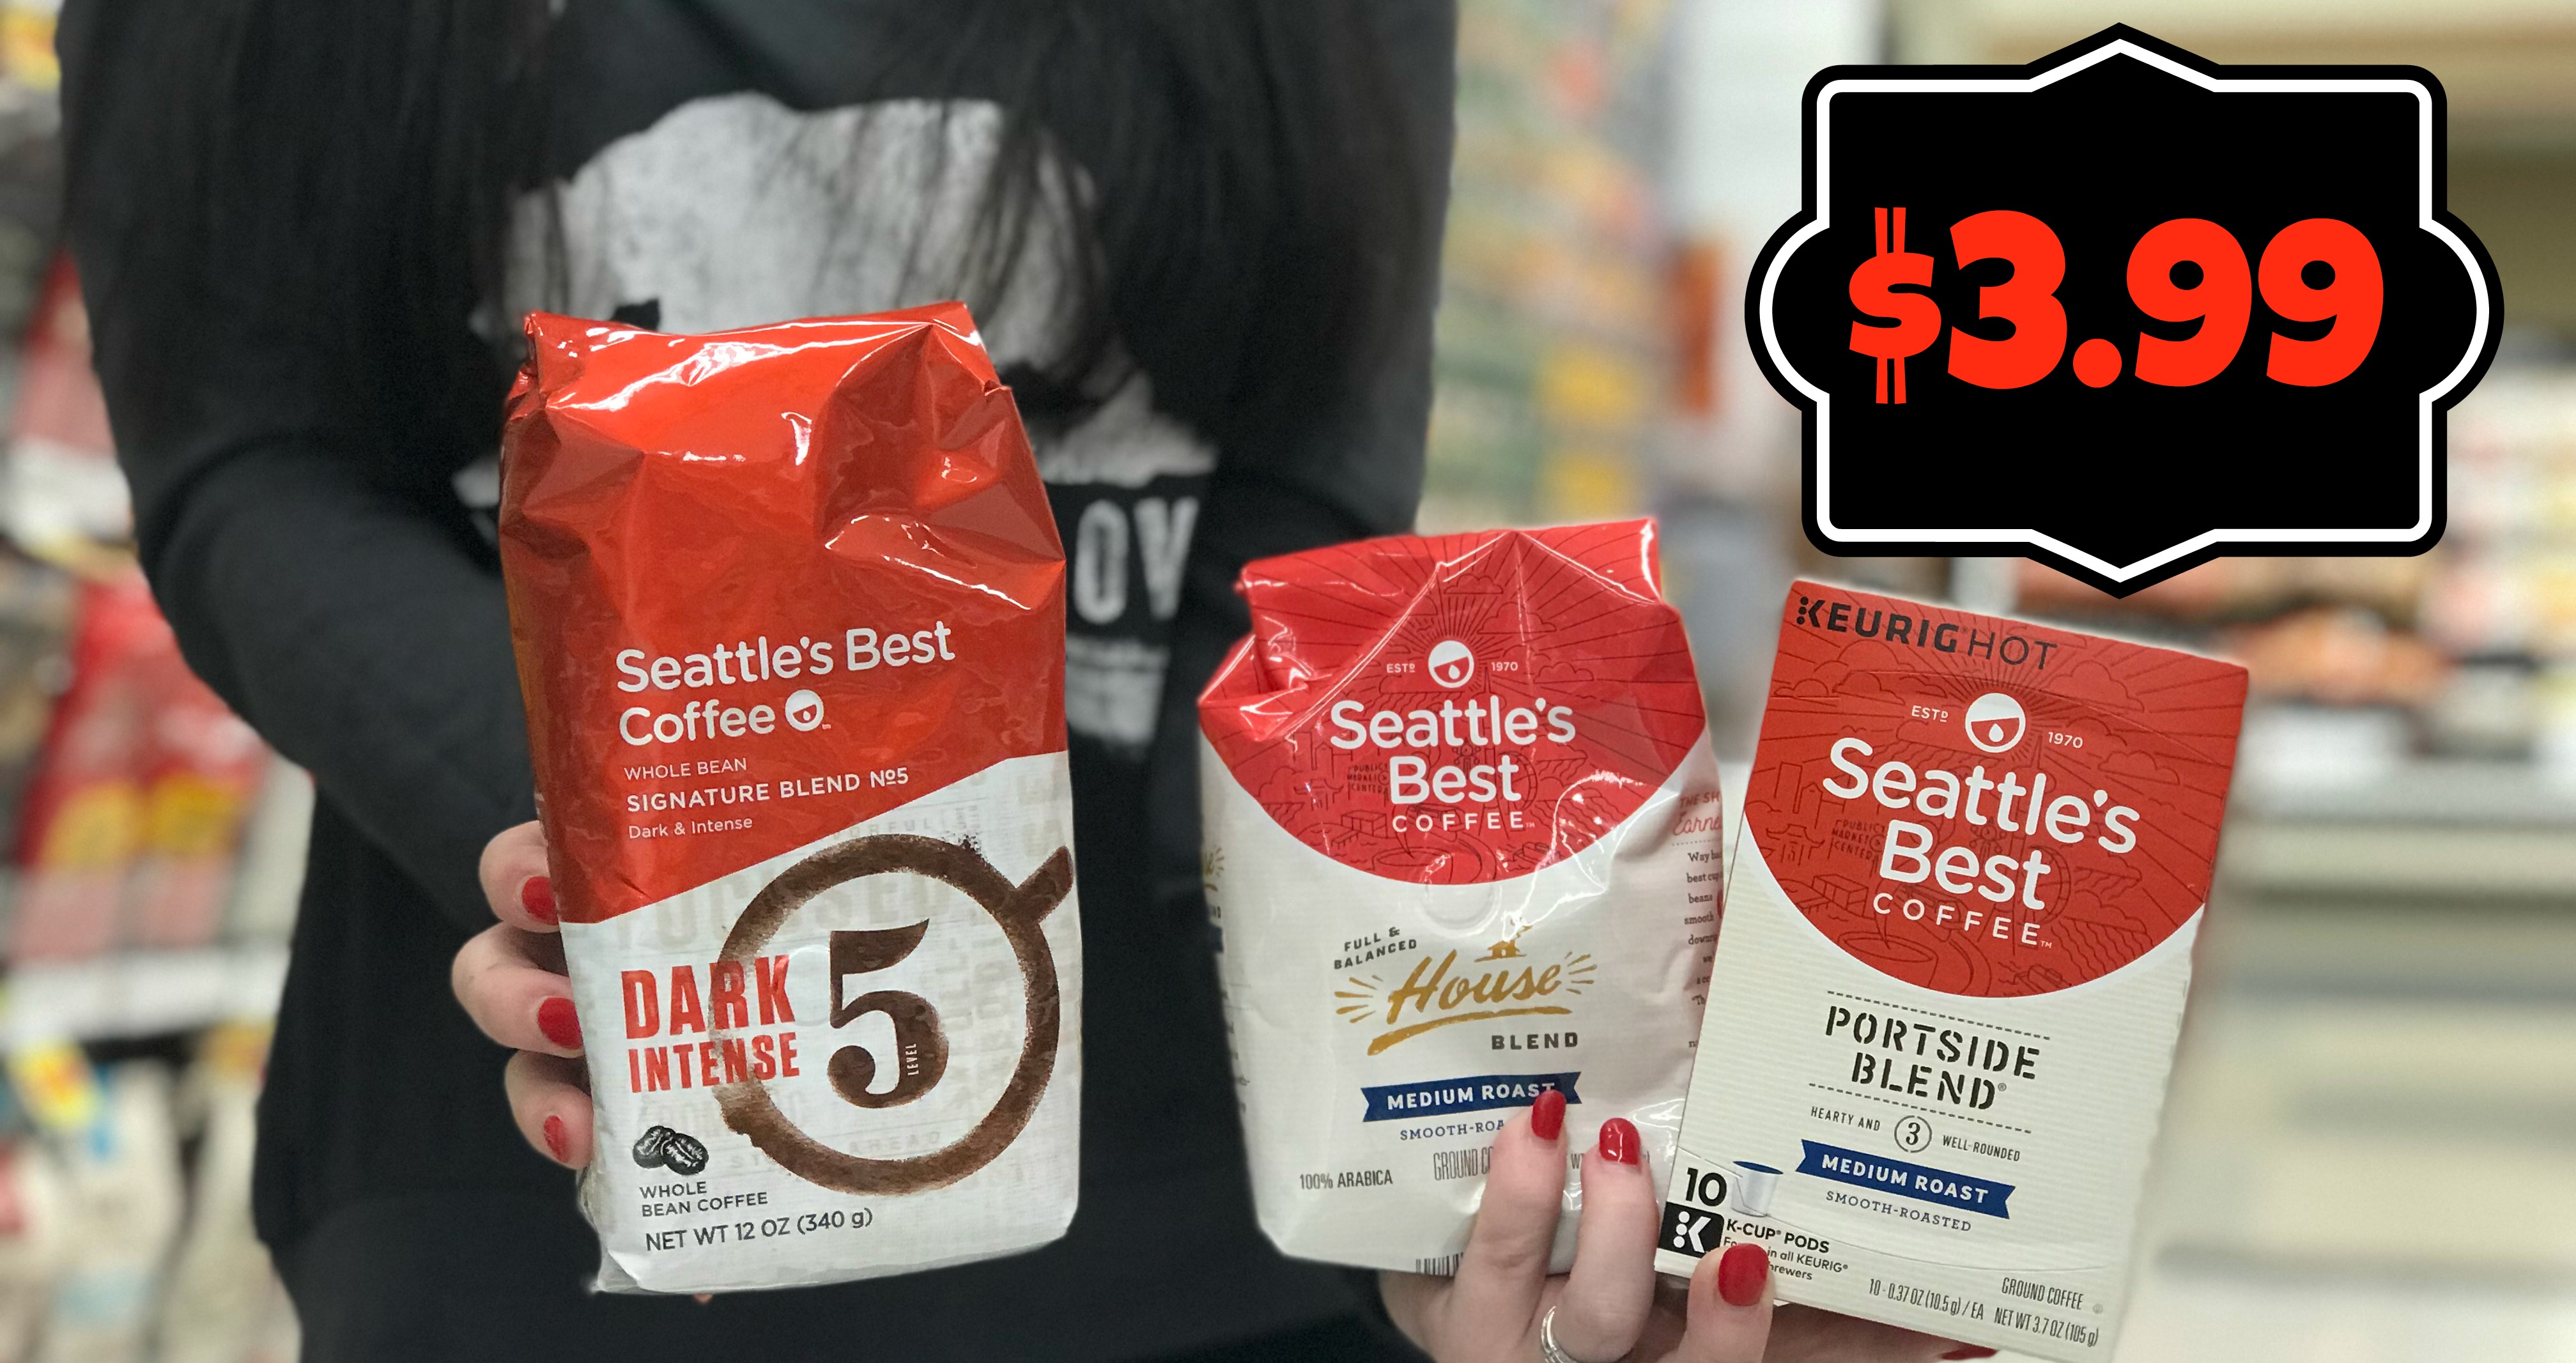 Seattle's Best Coffee (KCups, Whole Bean and Ground) as